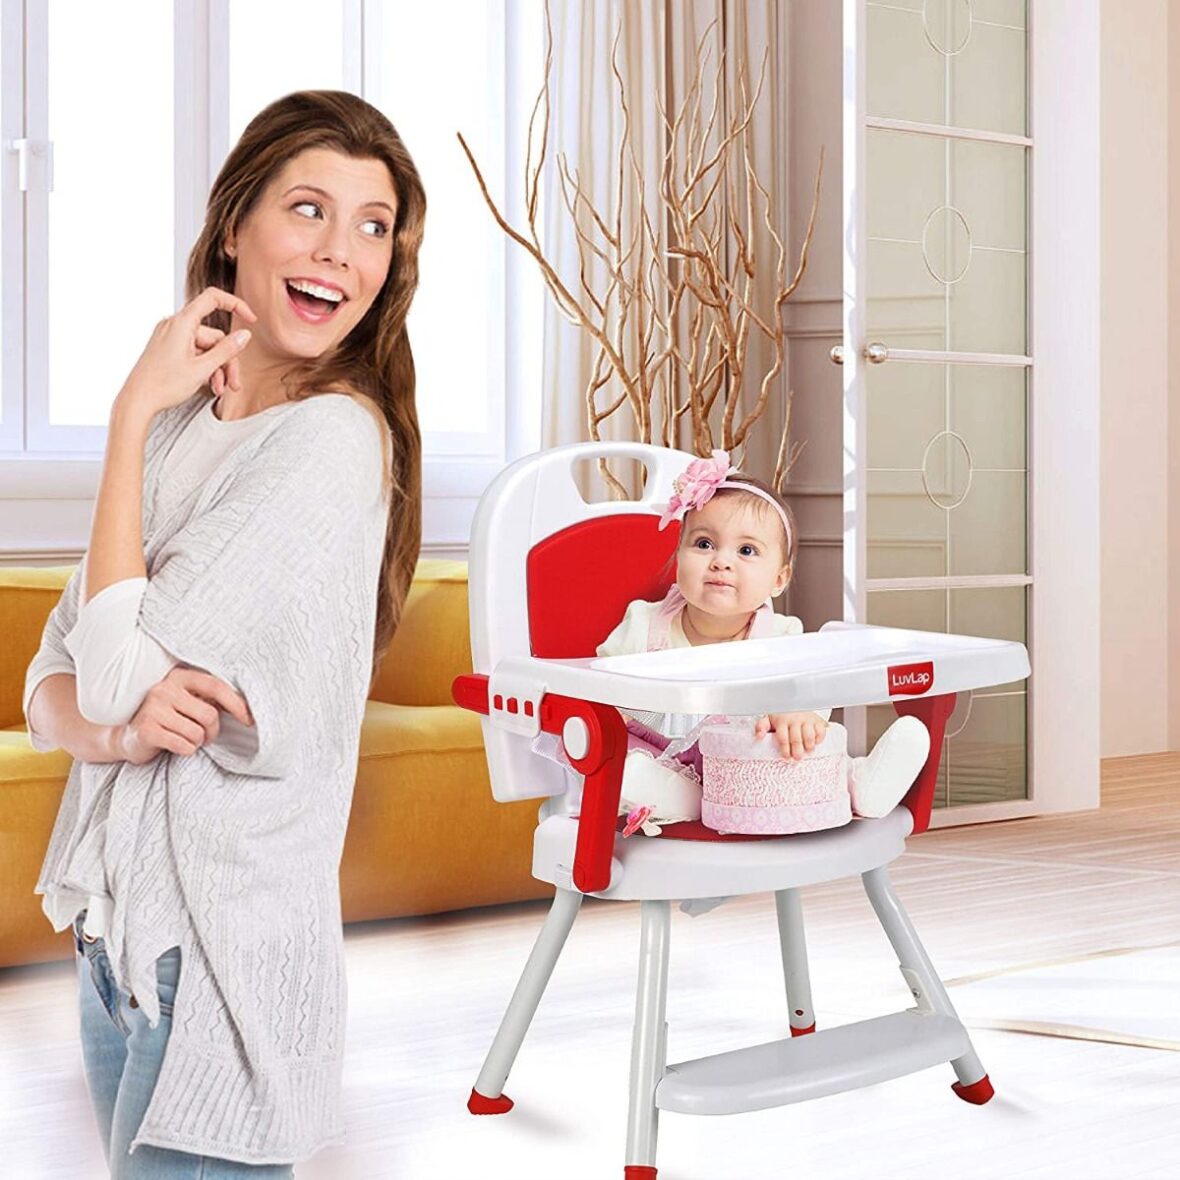 LuvLap Cosmos 3-in-1 Baby High Chair, Red8